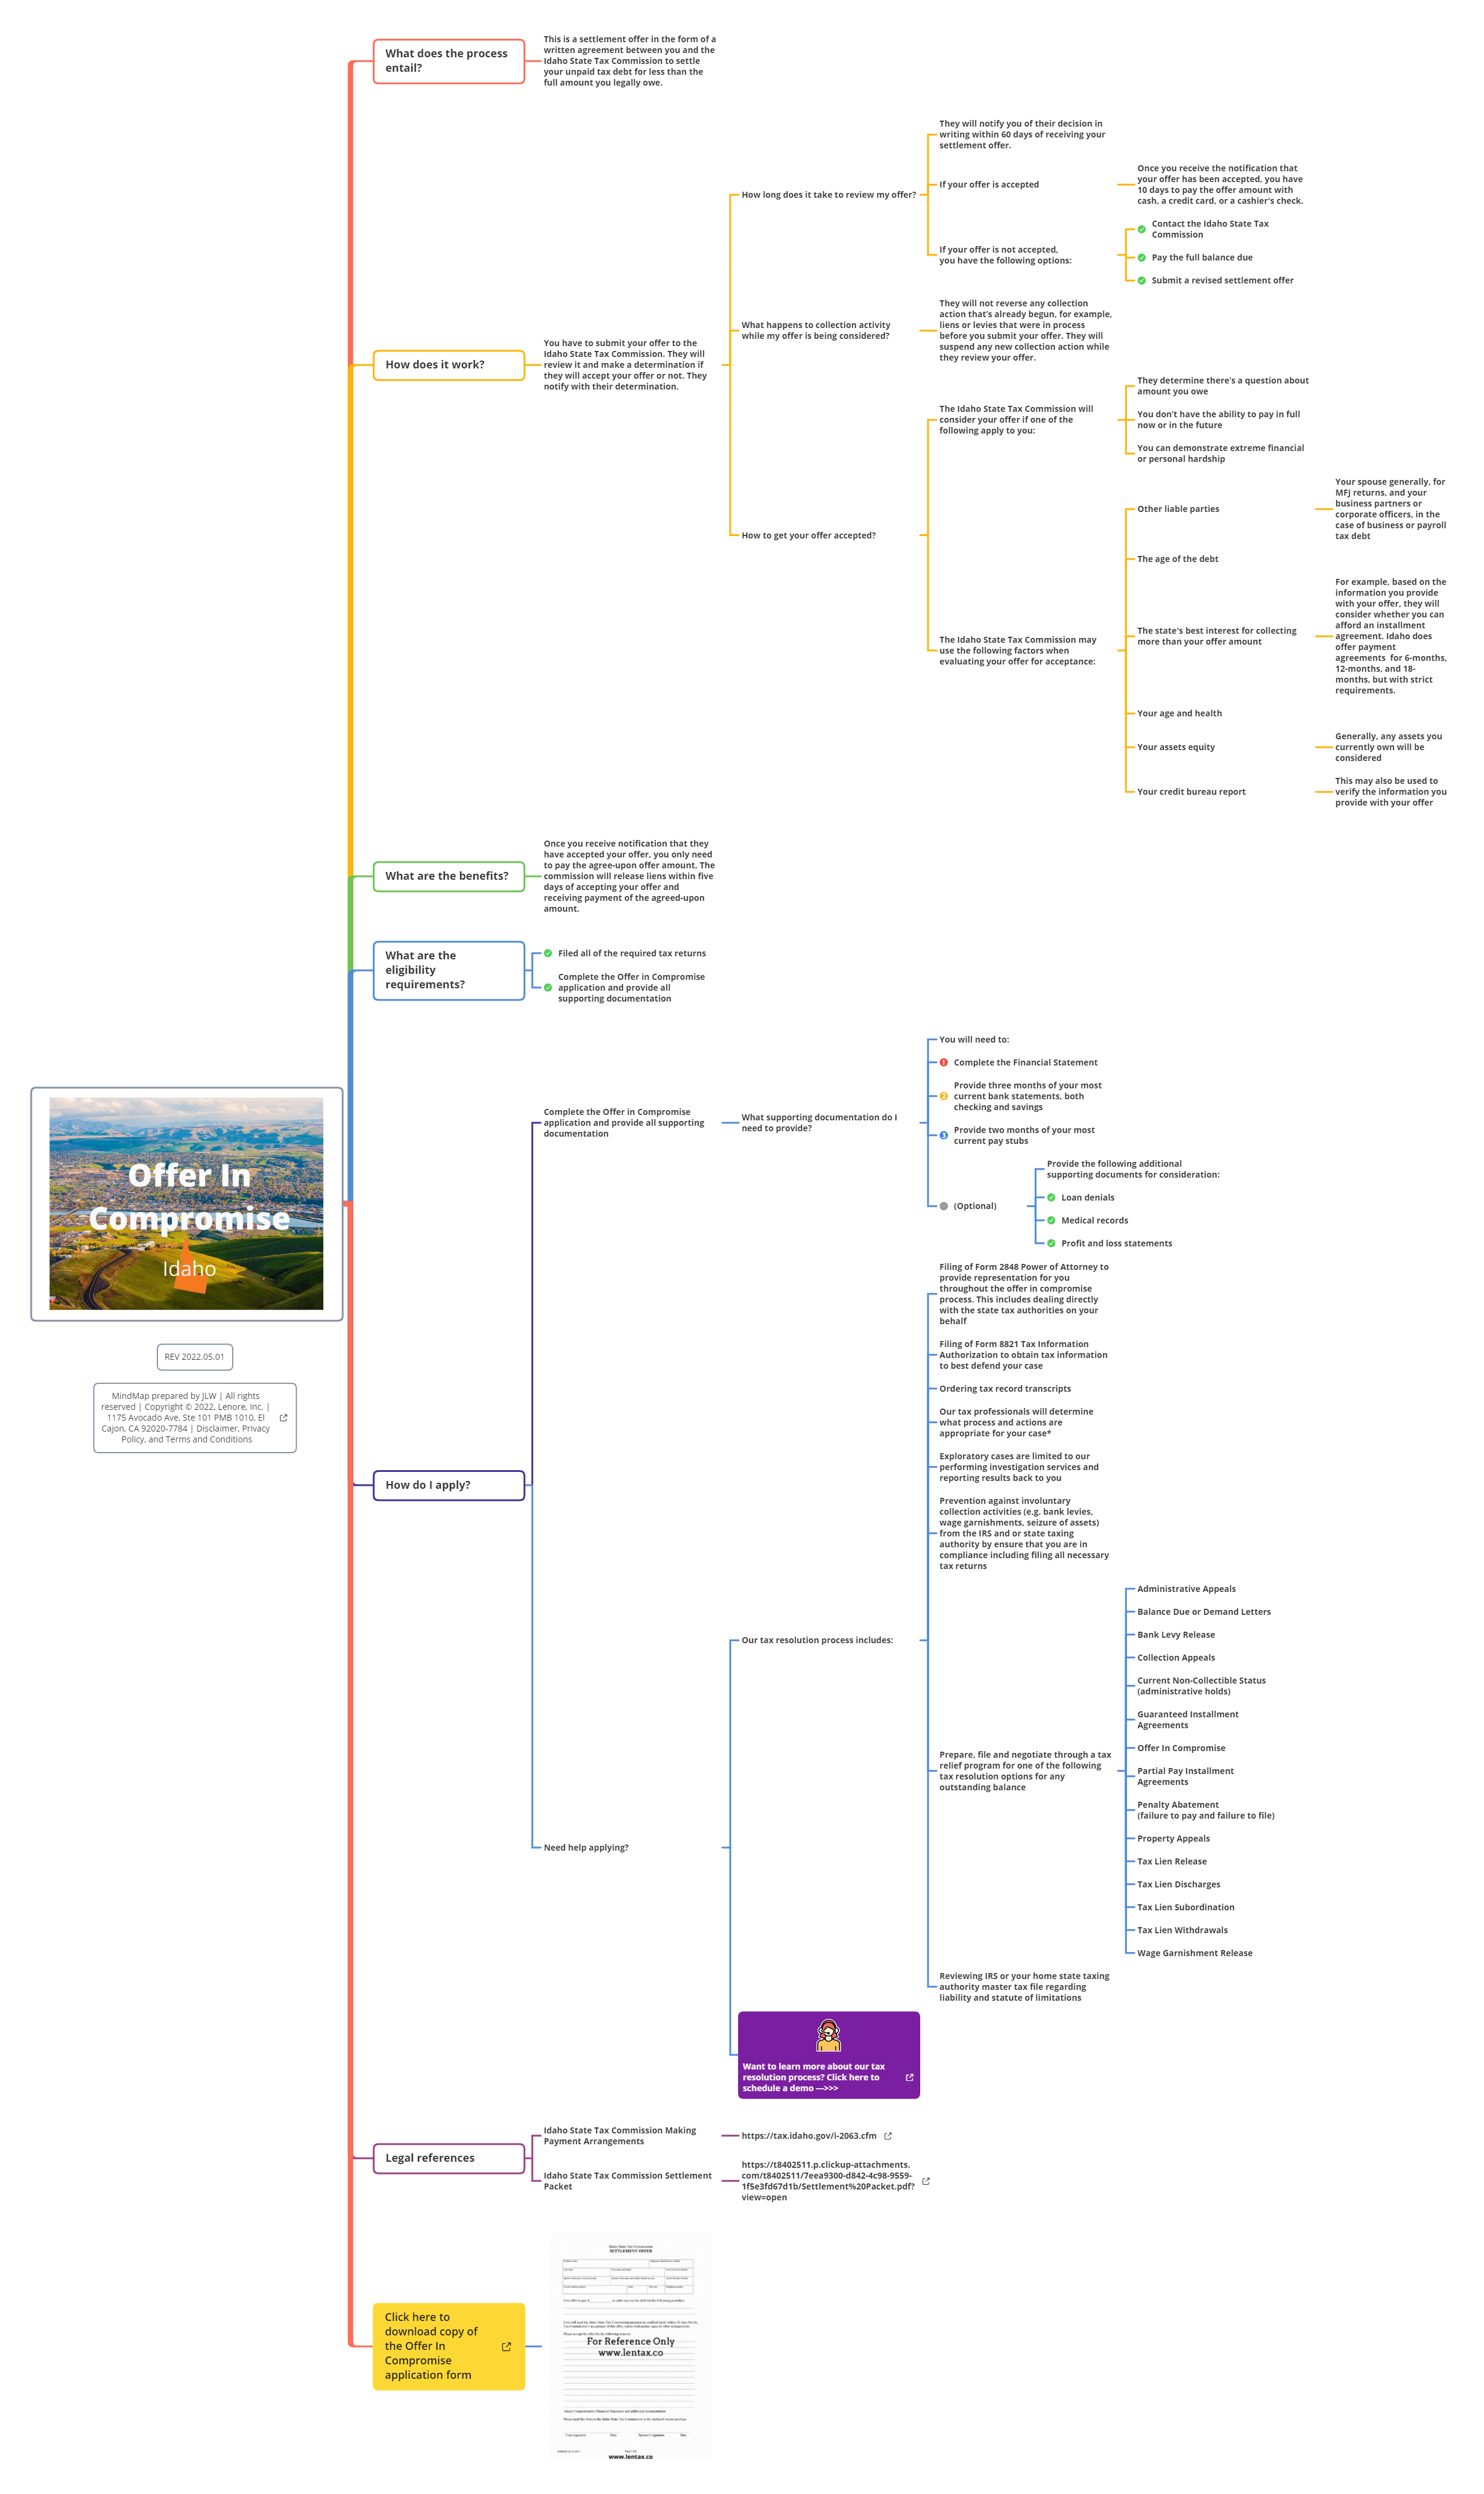 015_FREE_mindmap_Offer In Compromise_Idaho_Xmind_expanded-2